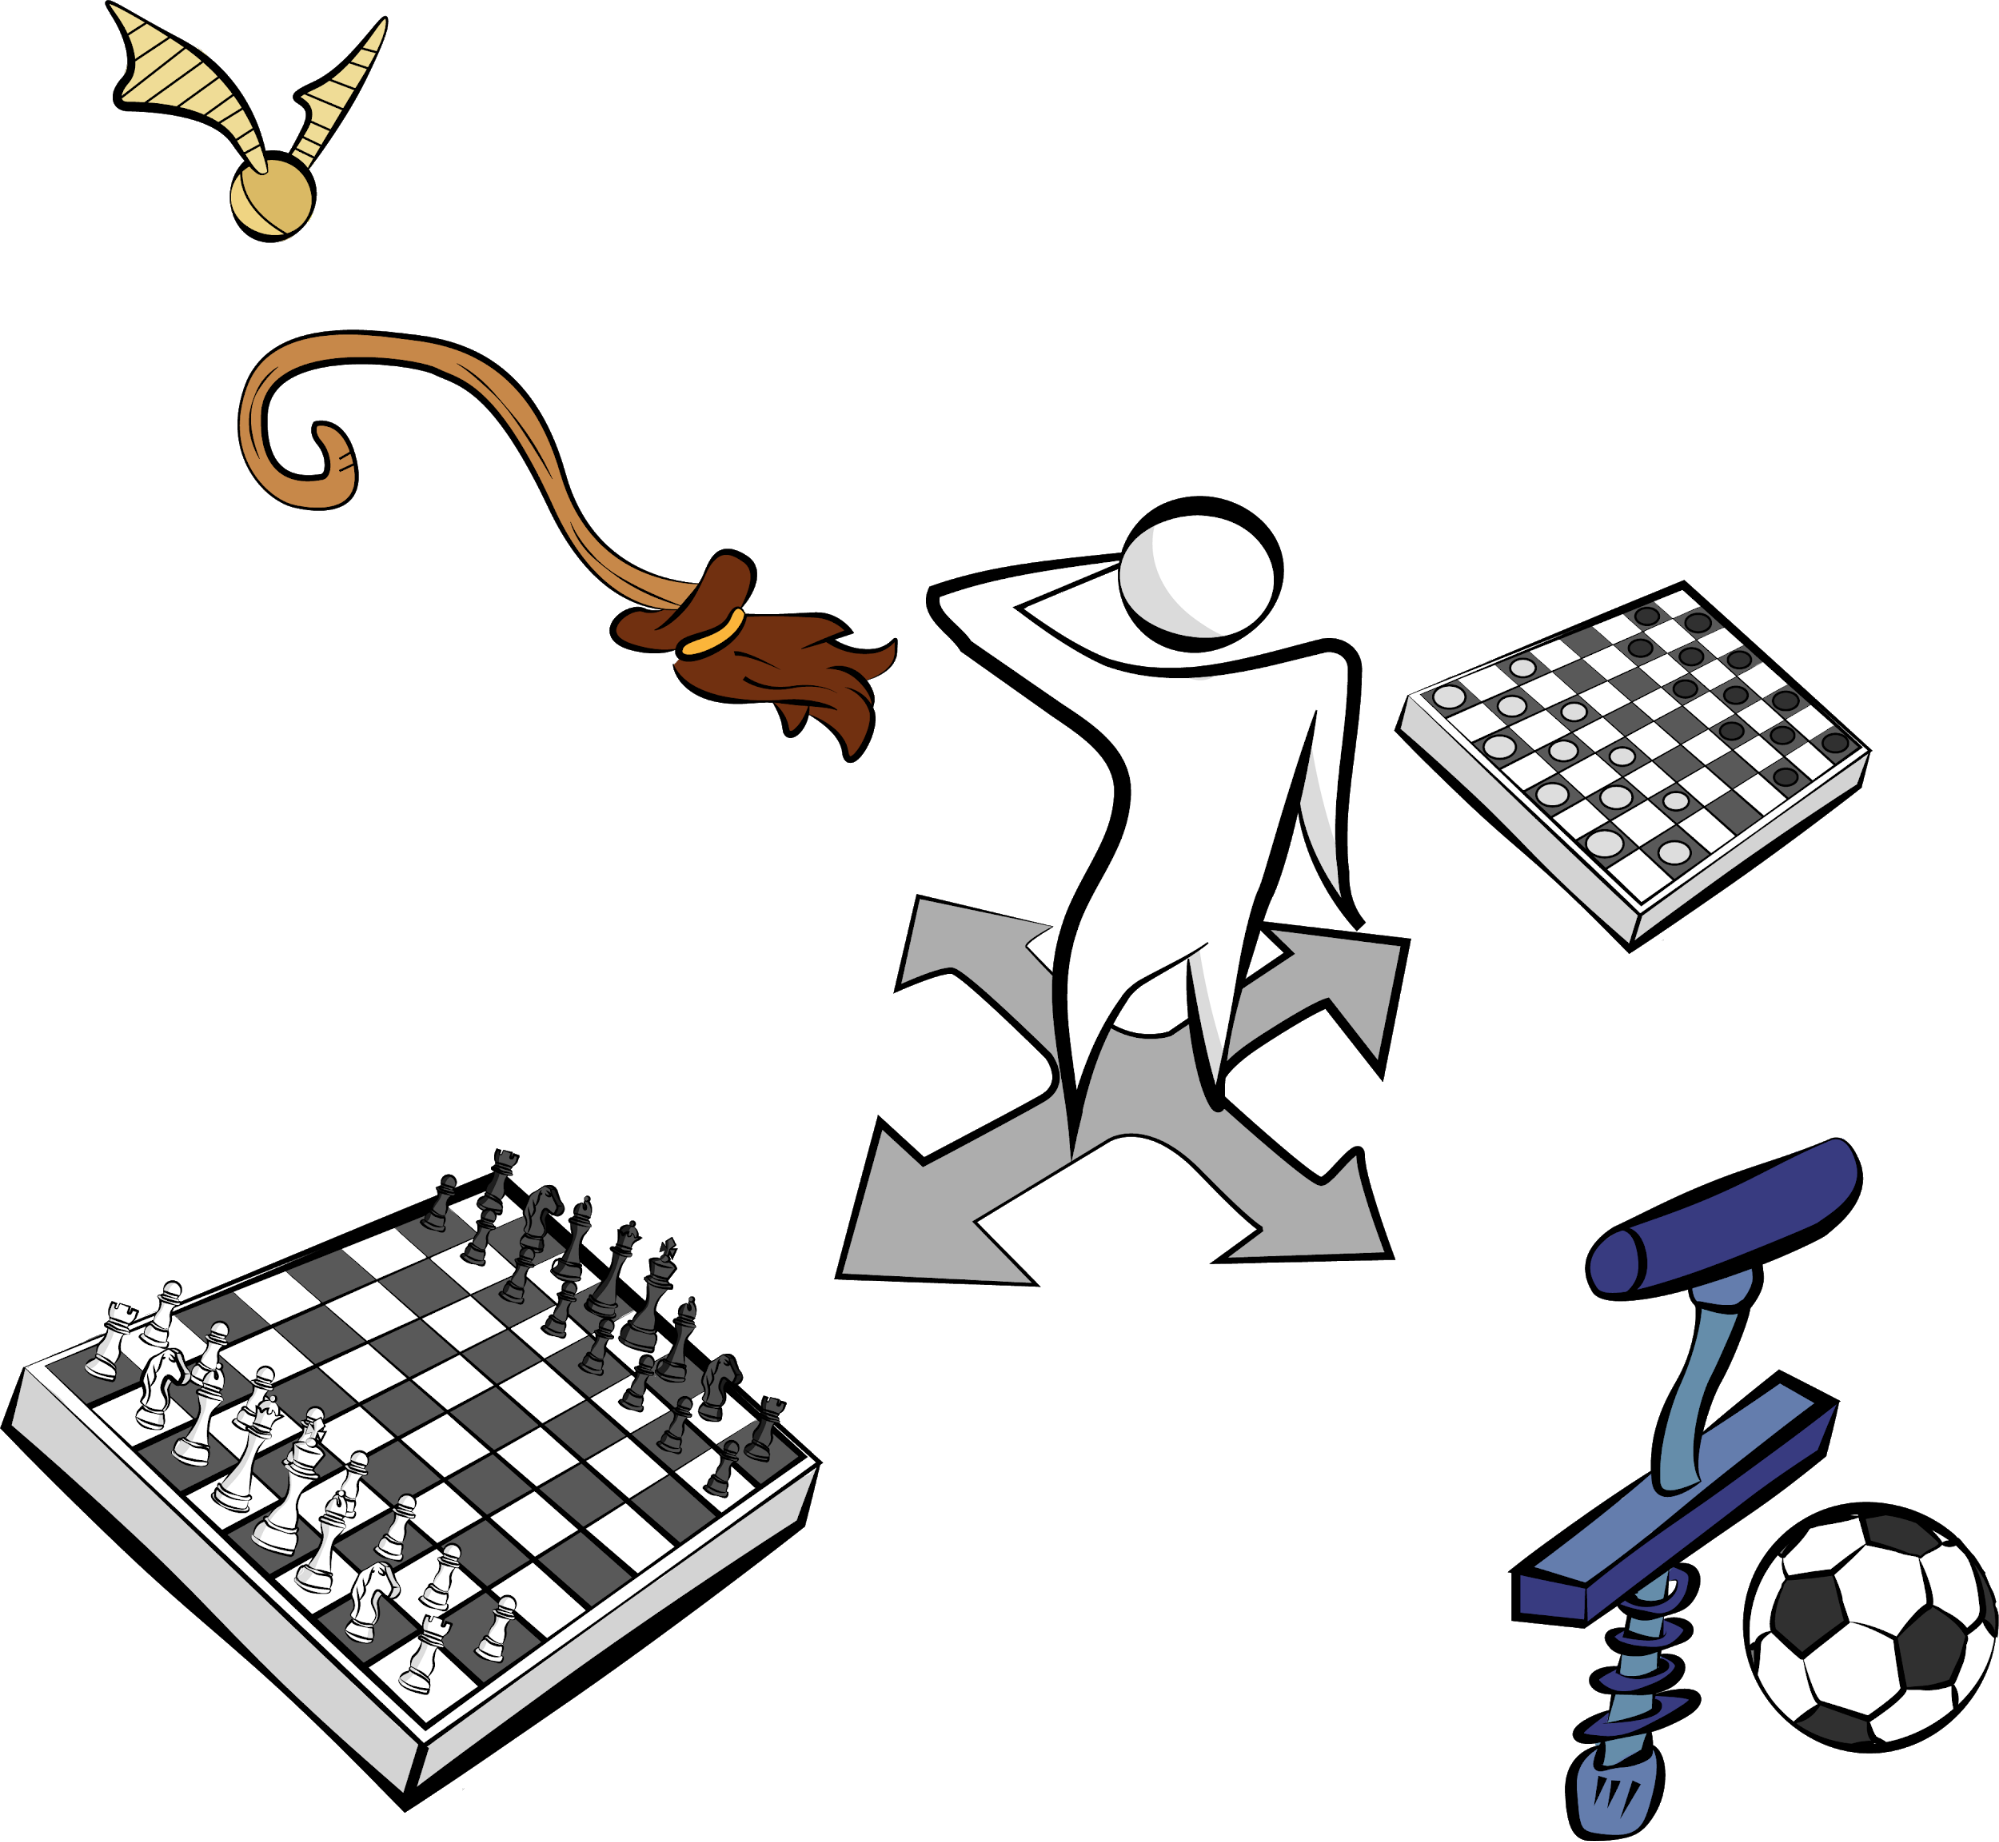 Decision between checkers, chess, Quidditch, and Calvin Ball